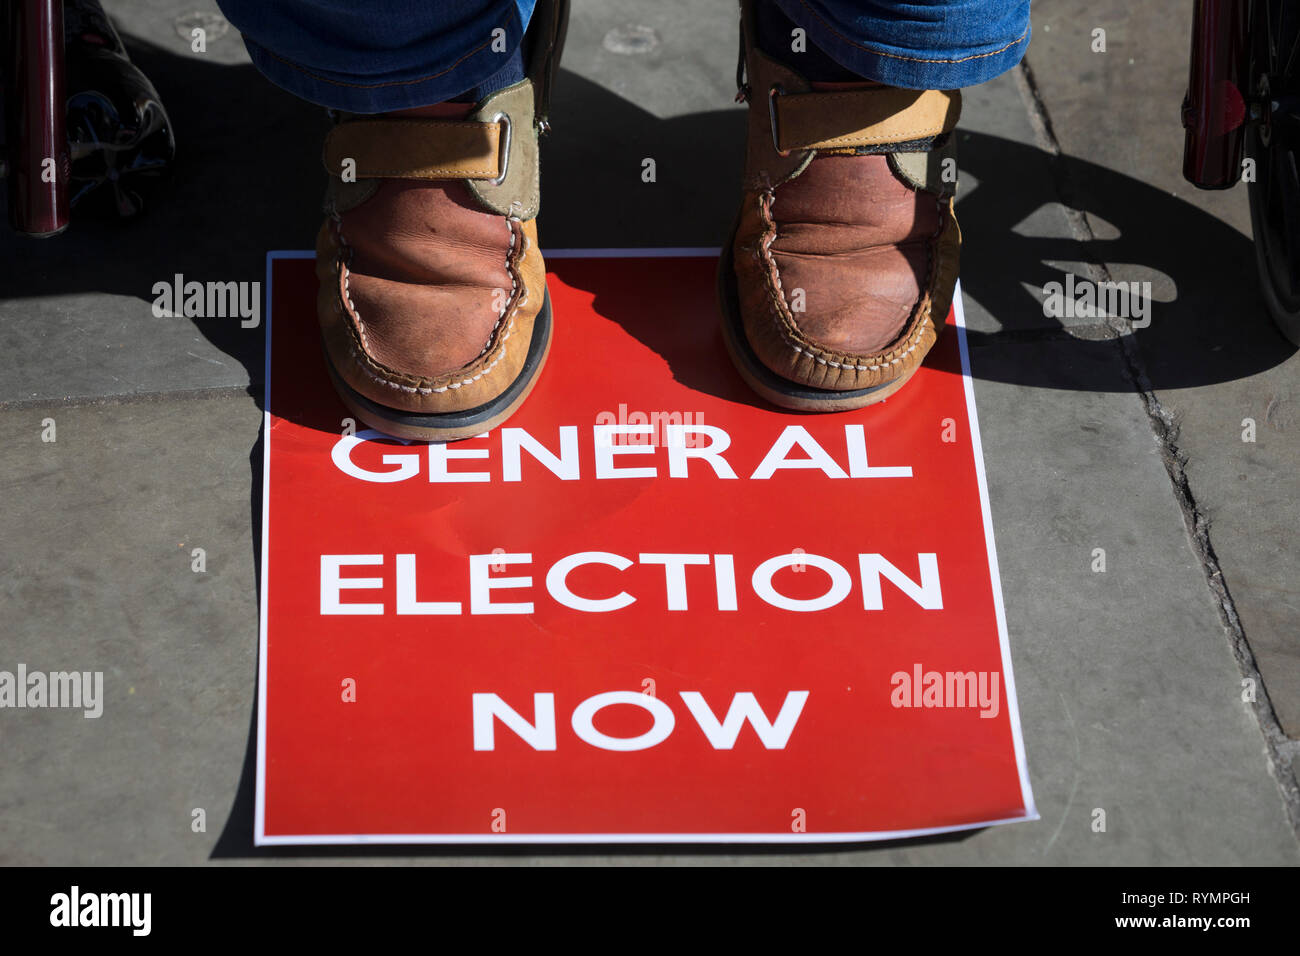 On the day that MPs in Parliament vote on a possible delay on Article 50 on EU Brexit negotiations by Prime Minister Theresa May, an activist demands a general election during a protest outside the House of Commons, on 14th March 2019, in Westminster, London, England. Stock Photo